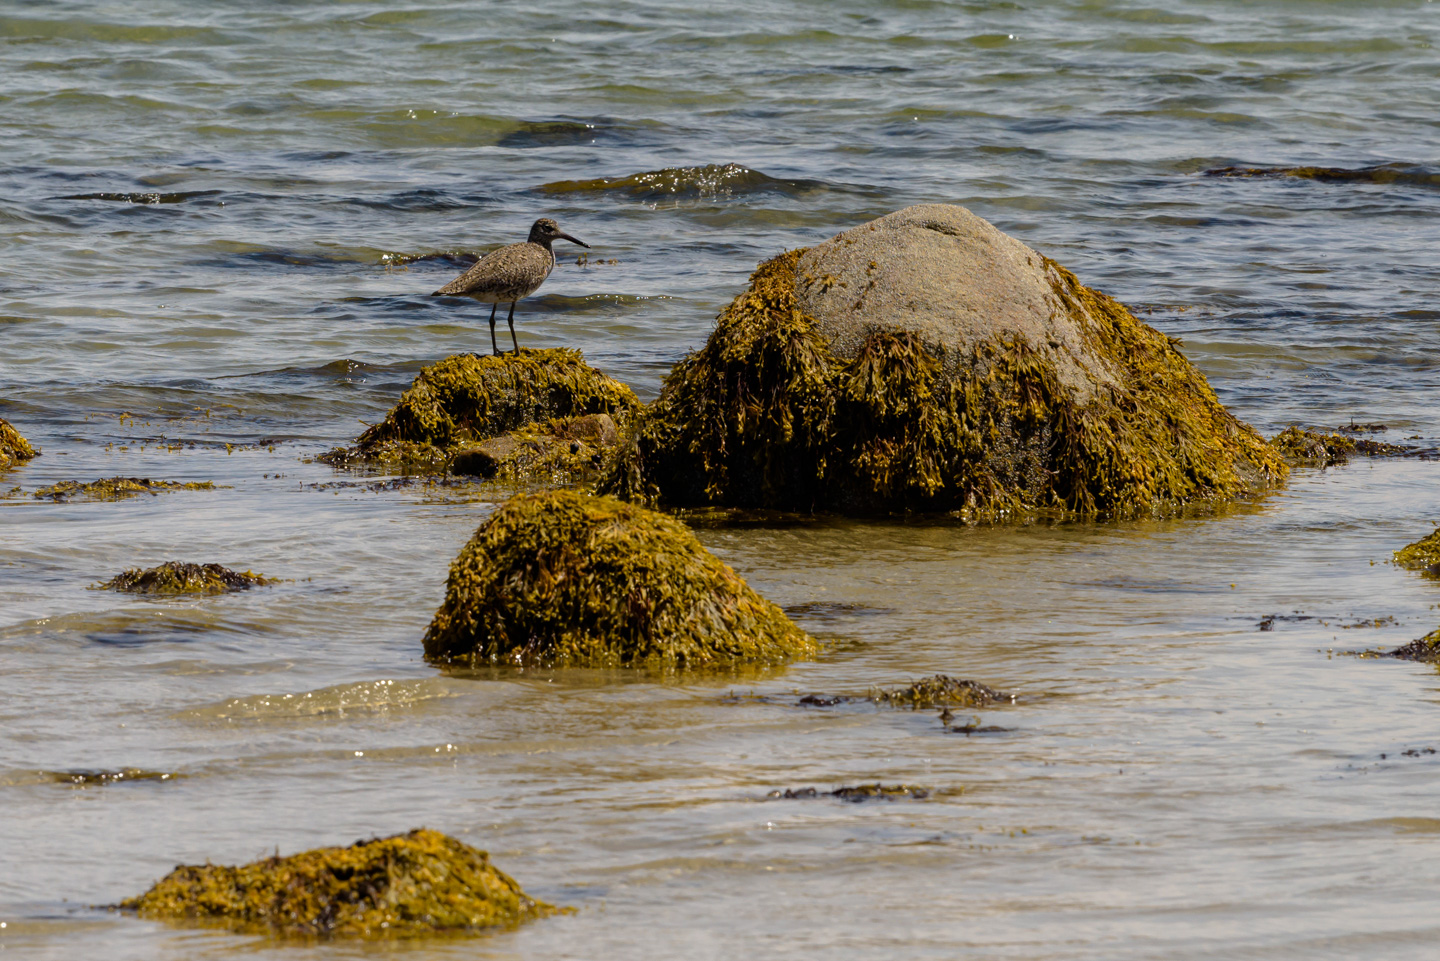 A Willet standing on a rock in the water